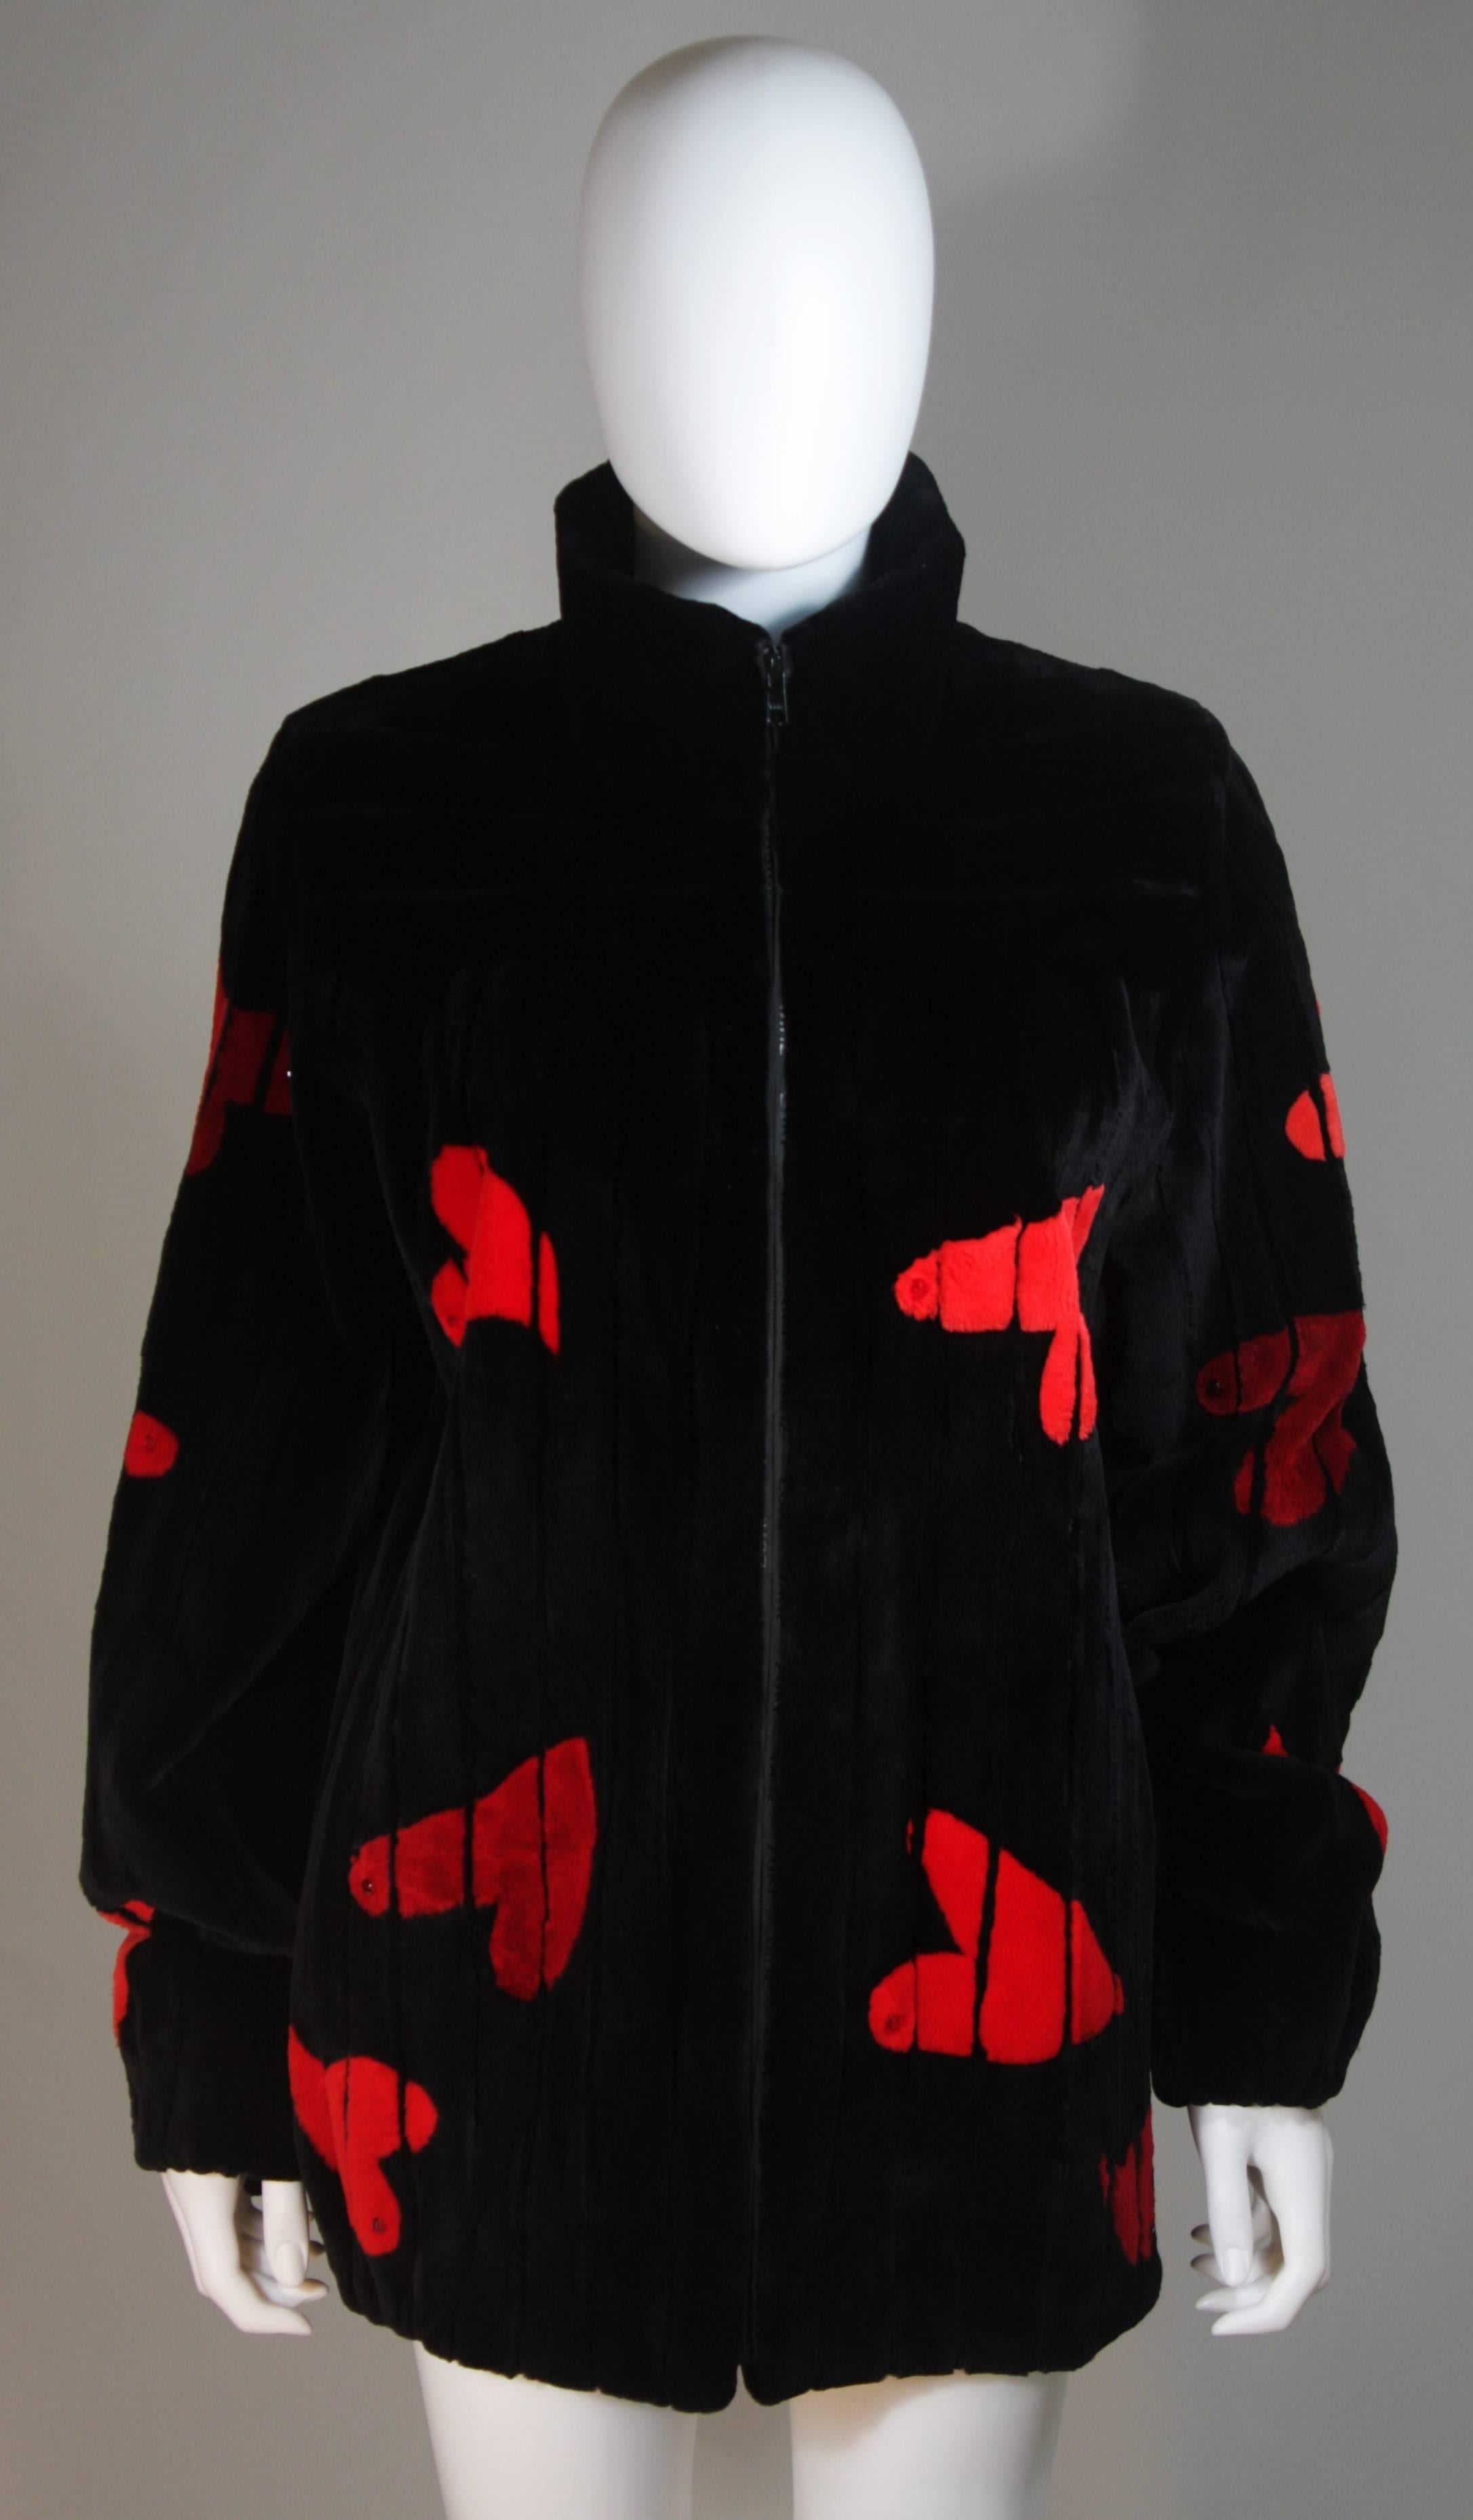 This Beautifully Canadian Zuki coat is composed of a striking color infused sheared beaver. The ultra soft coat features a black and red hearts motif. There is a center front zipper closure. There are velvet lined side pockets and a perfect collar.